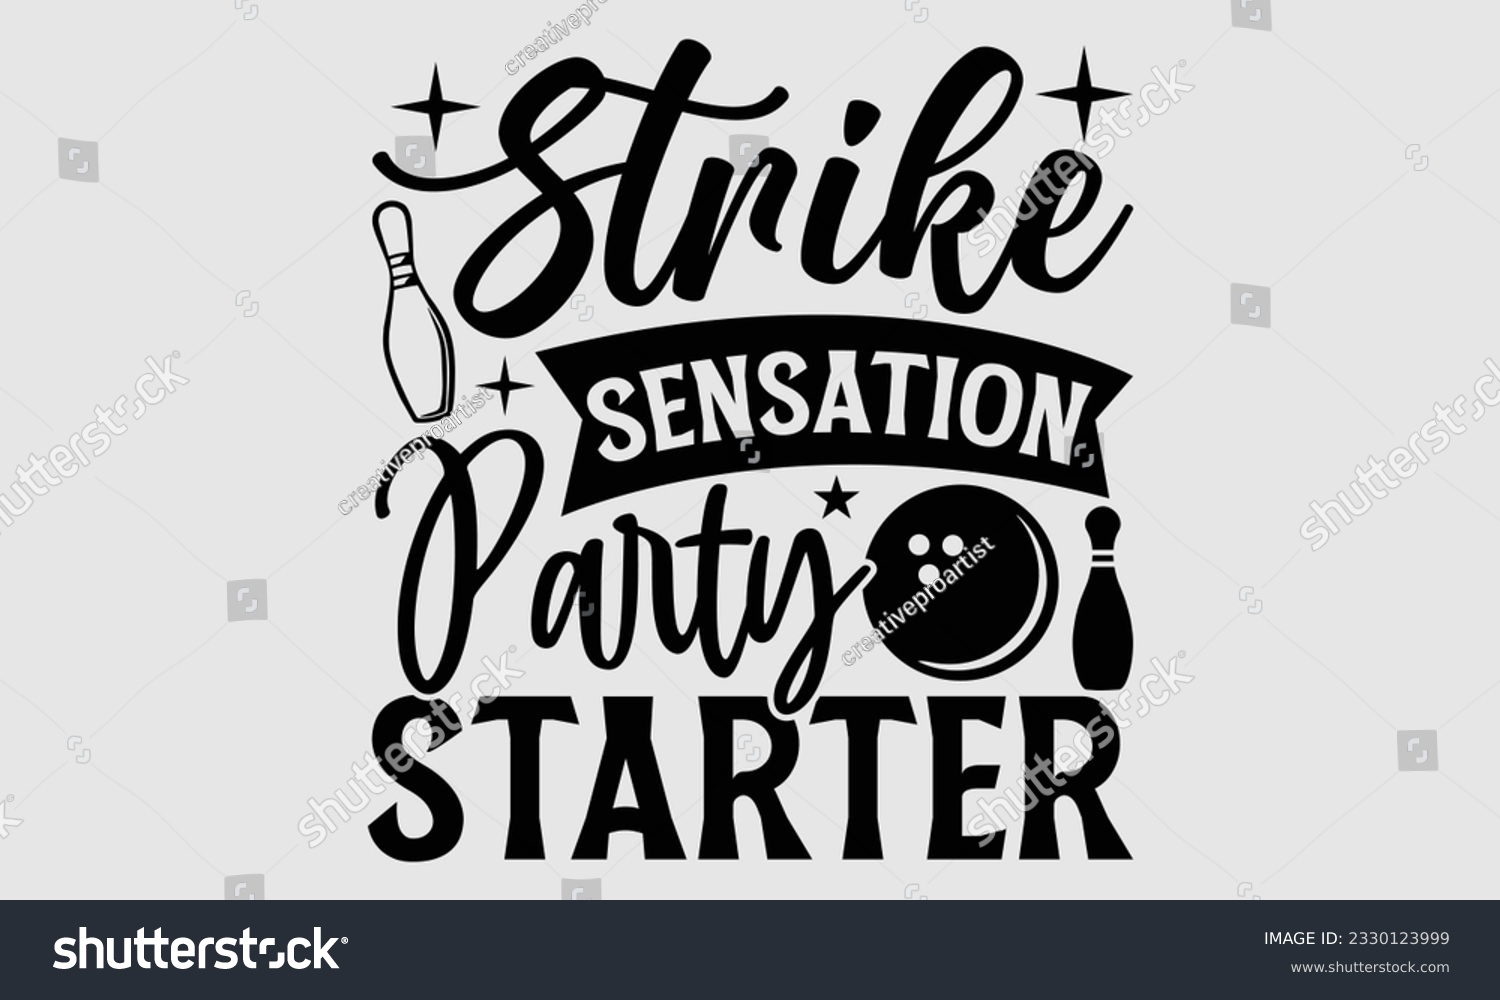 SVG of Strike Sensation Party Starter- Bowling t-shirt design, Illustration for prints on SVG and bags, posters, cards, greeting card template with typography text EPS svg